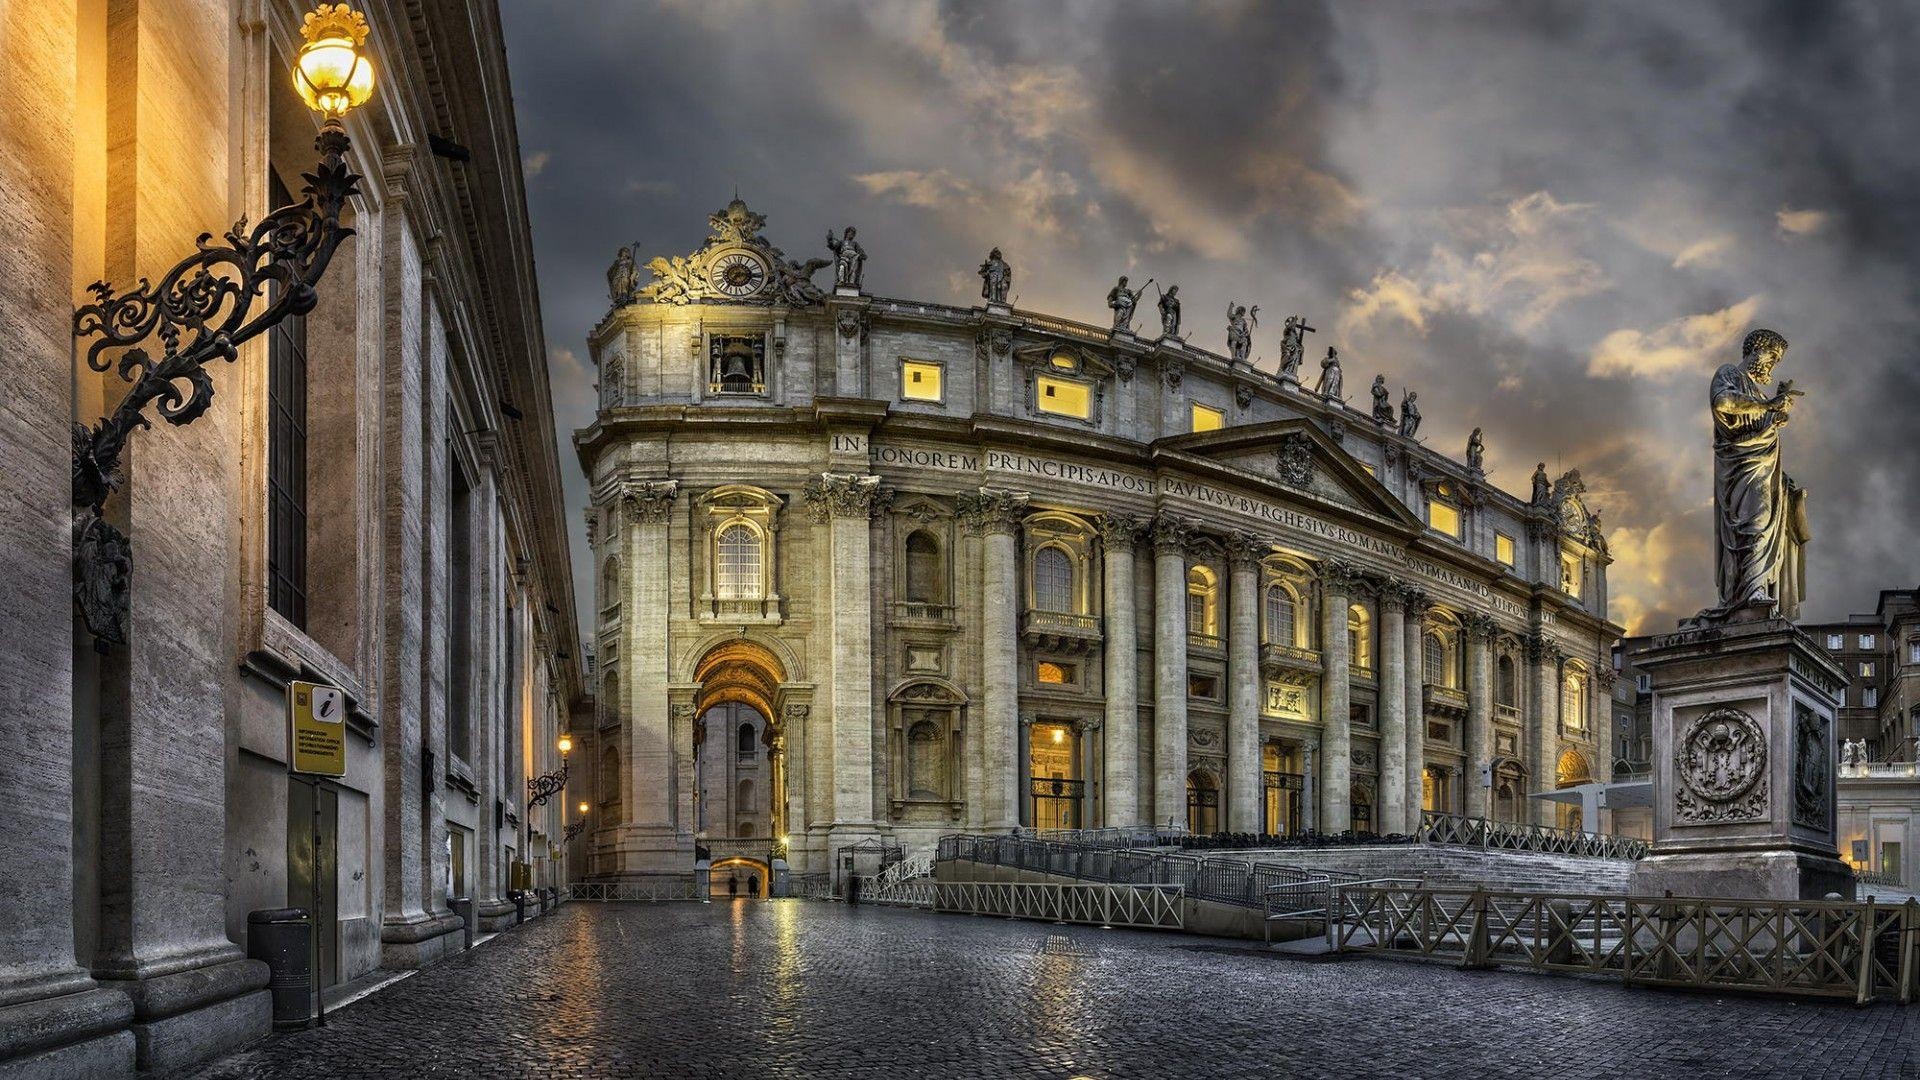 City Square: A walkway to the Saint Peter's Basilica, The Catholic heart of the world, Vatican City. 1920x1080 Full HD Wallpaper.